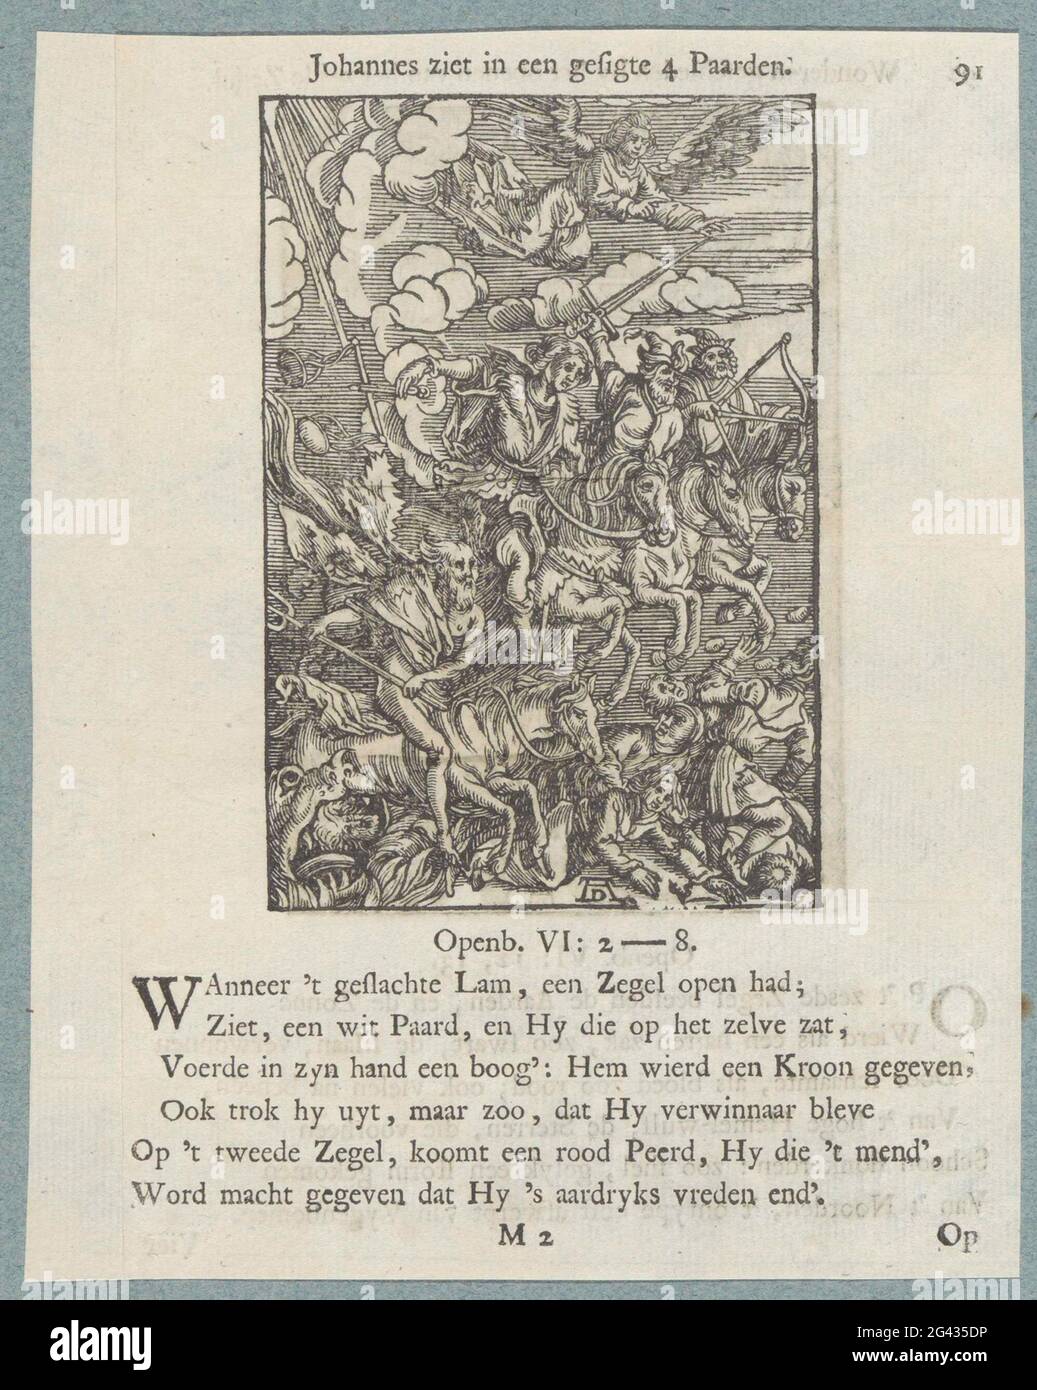 The four riders of the apocalypse; Johannes sees 4 horses in a sight. Four men on horseback, armed with an arrow and bow, a sword, a scales and a riek, people walk under the foot. An angel above that. Above the show a title. There are six fresh rules and a reference to Revelation 6: 2-8. The print is part of an album. Stock Photo